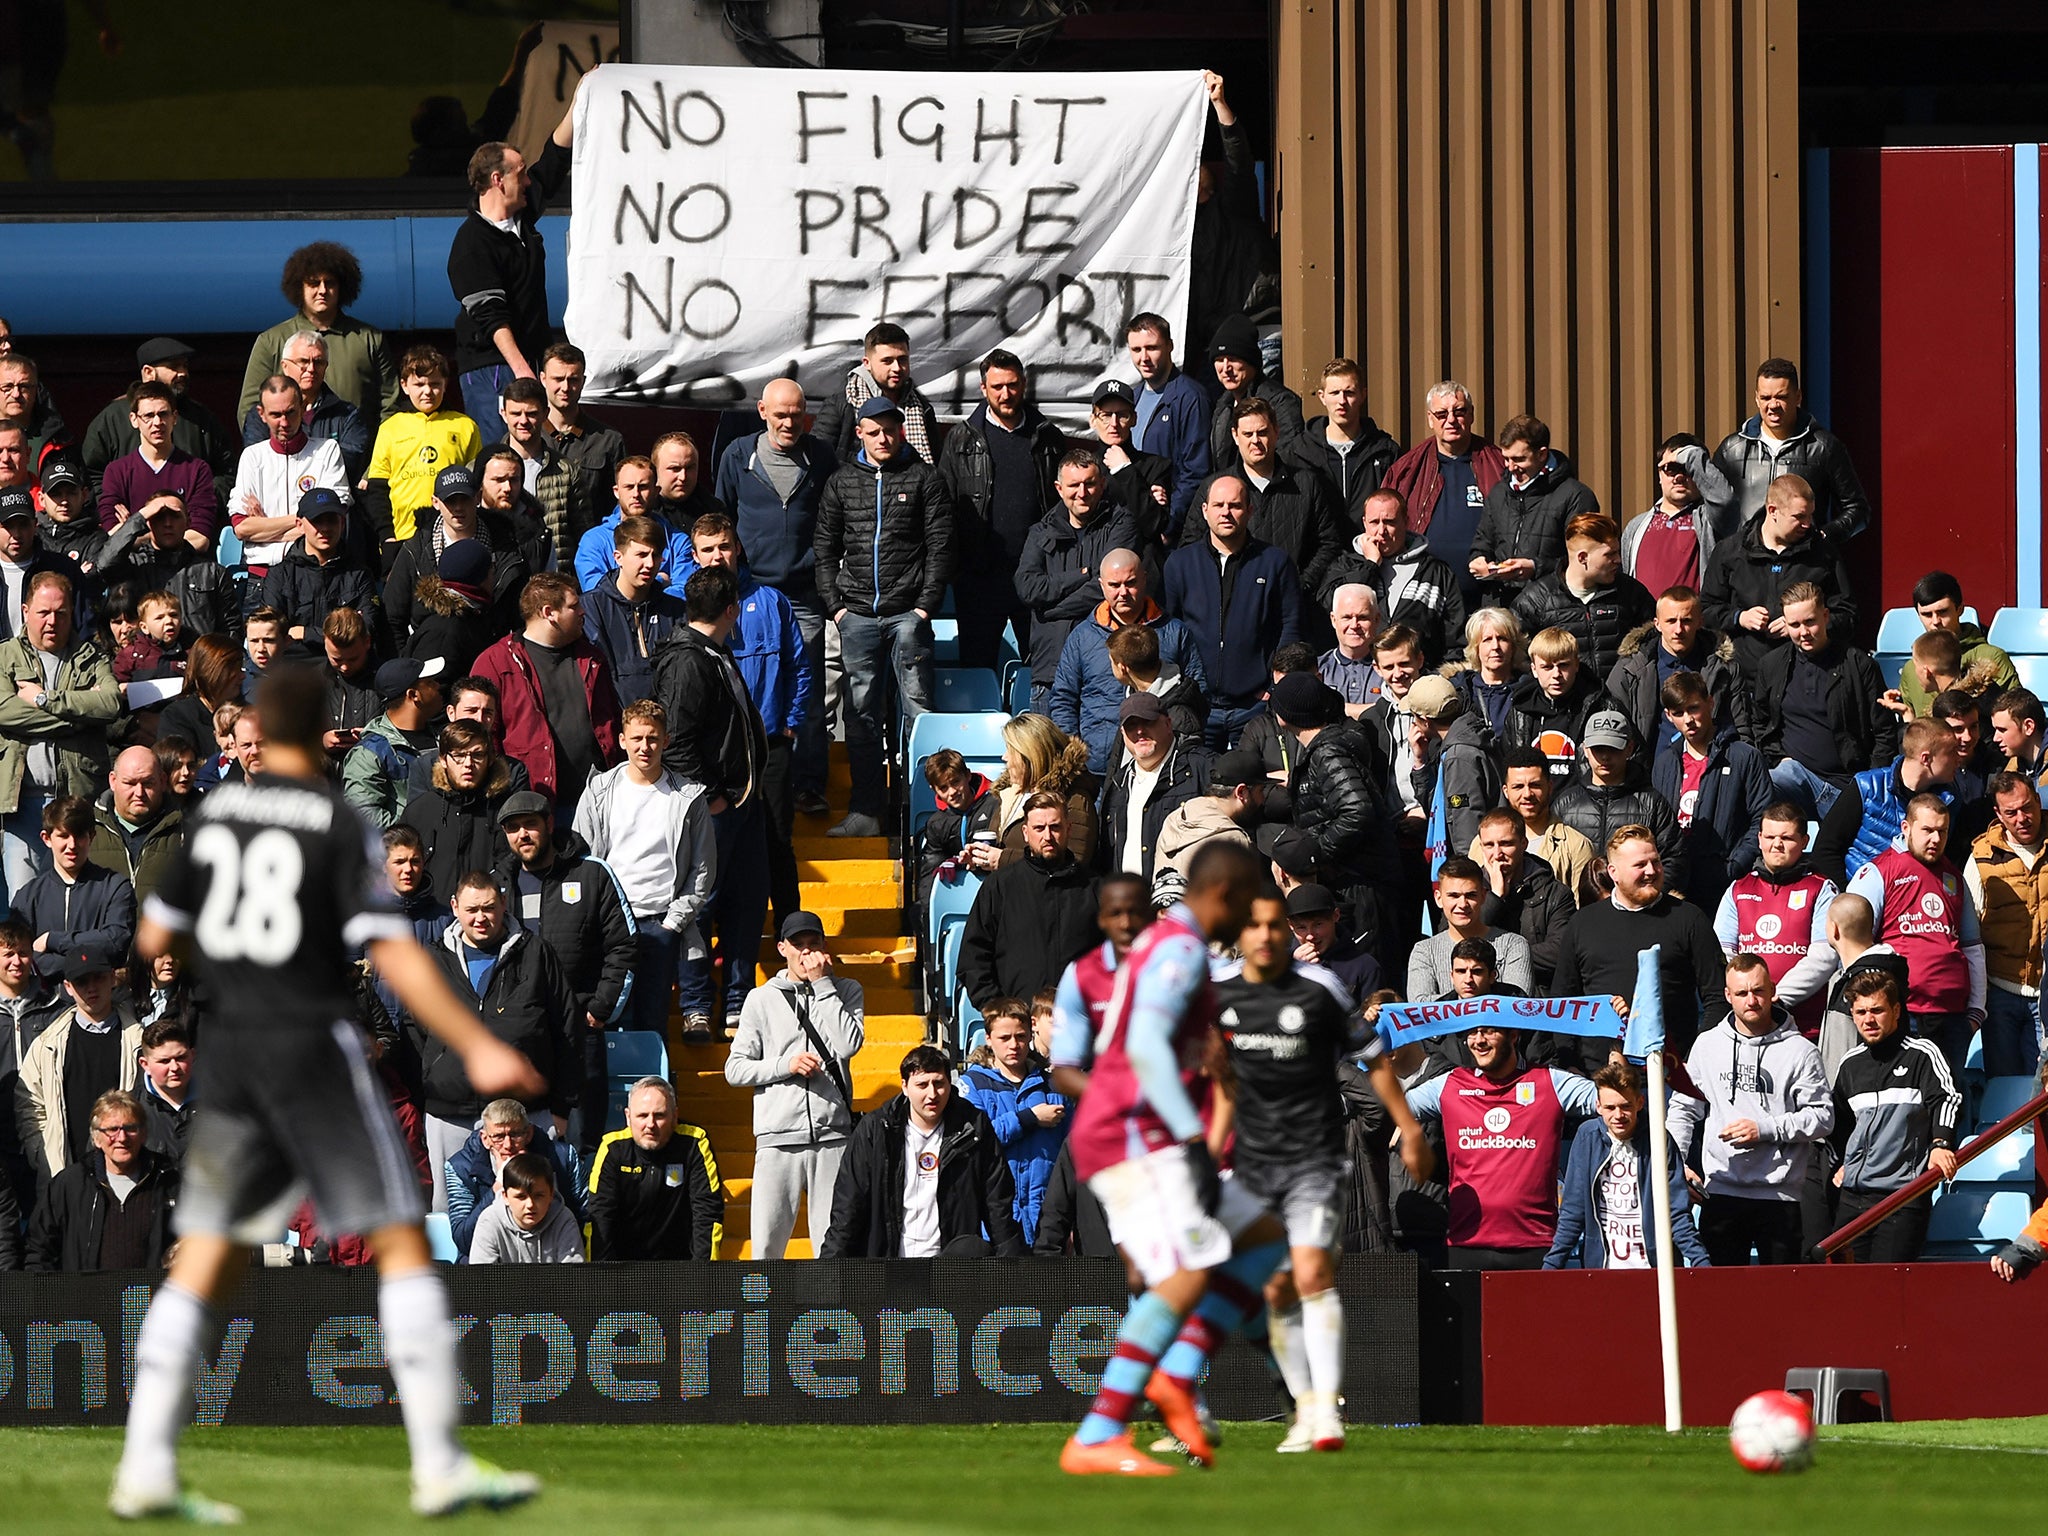 Aston Villa supporters display a protest banner during the defeat to Chelsea